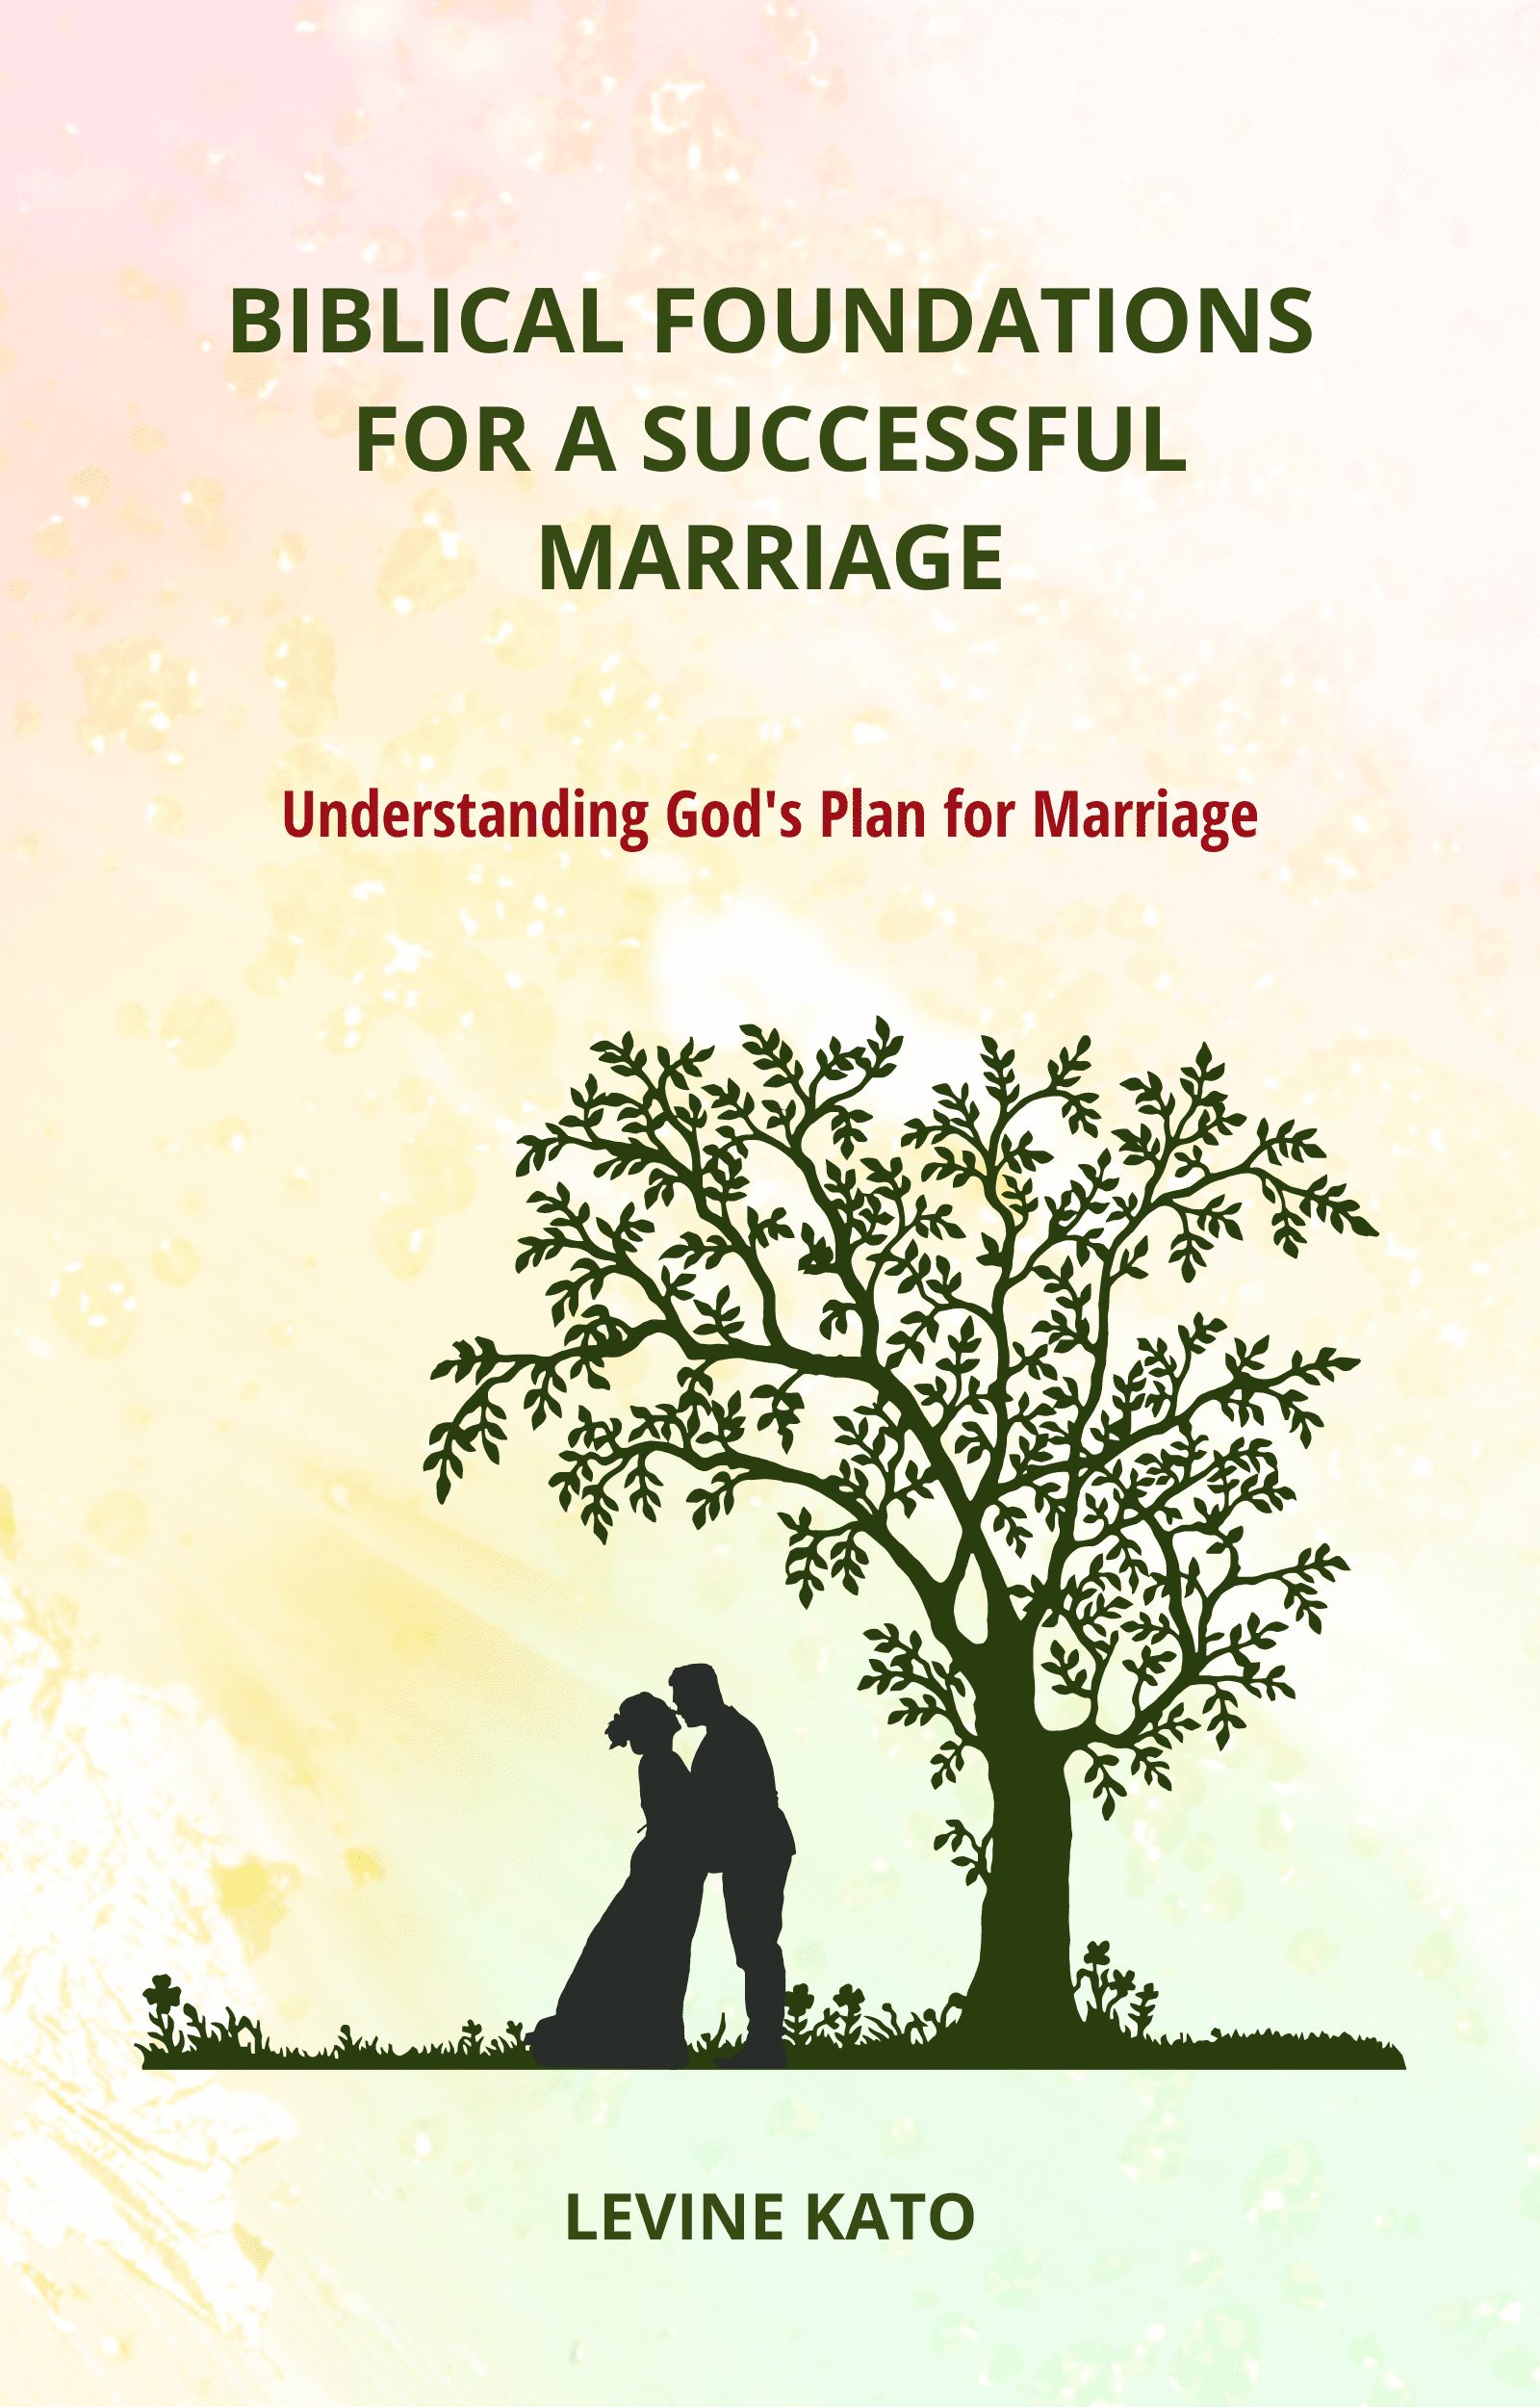 Biblical Foundations for A Successful Marriage